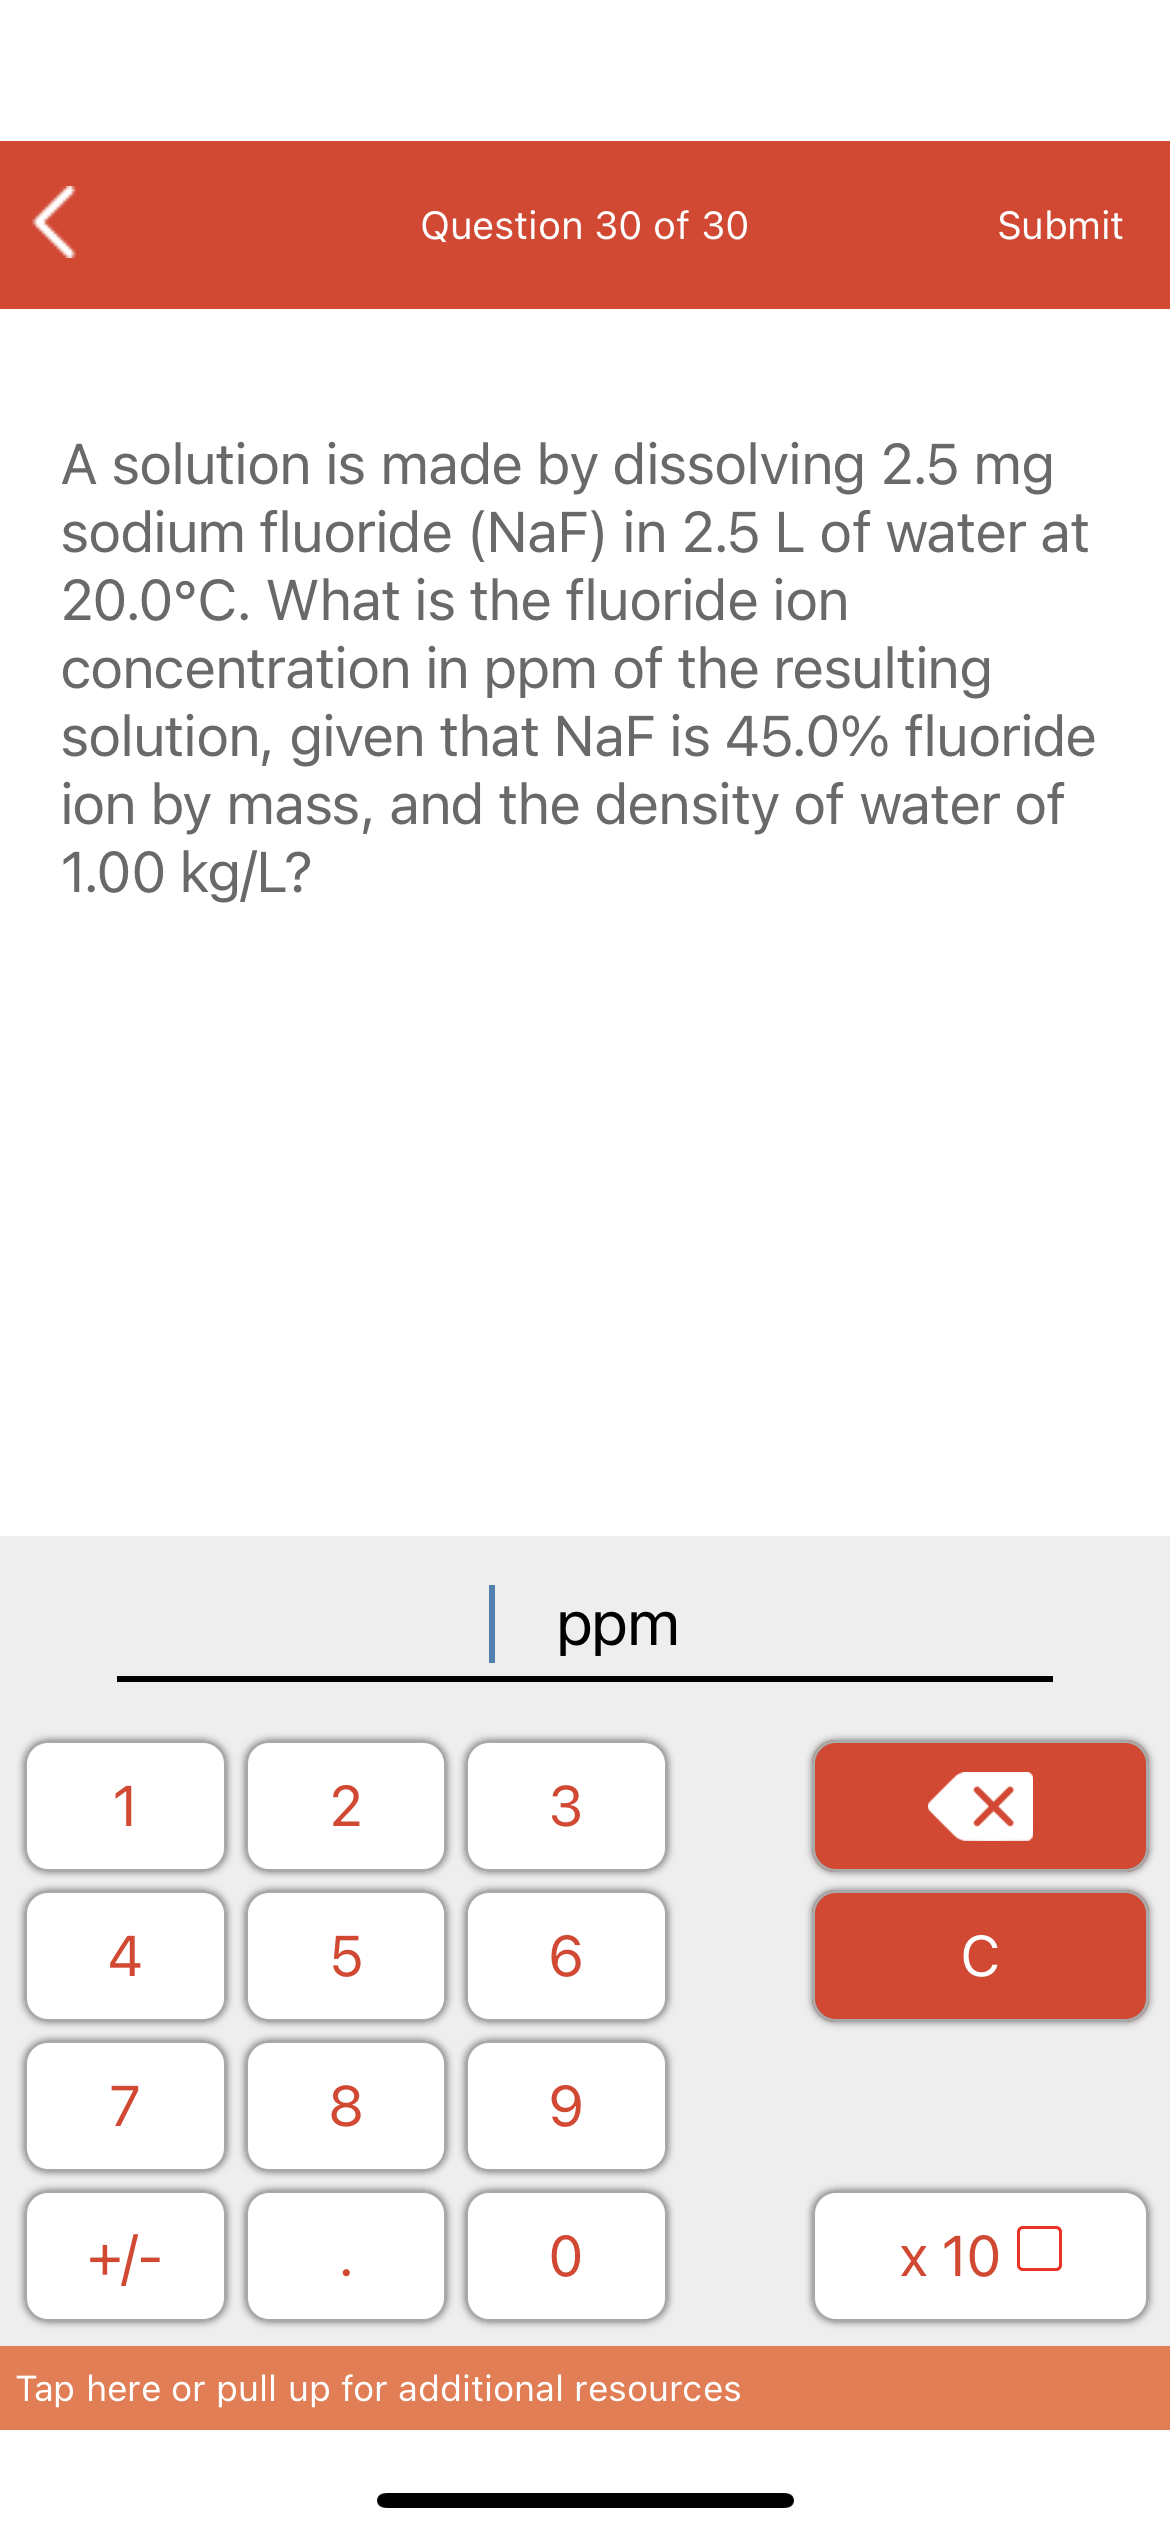 Question 30 of 30
Submit
A solution is made by dissolving 2.5 mg
sodium fluoride (NaF) in 2.5 L of water at
20.0°C. What is the fluoride ion
concentration in ppm of the resulting
solution, given that NaF is 45.0% fluoride
ion by mass, and the density of water of
1.00 kg/L?
| ppm
1
4
6.
C
7
+/-
x 10 0
Tap here or pull up for additional resources
LO
00
